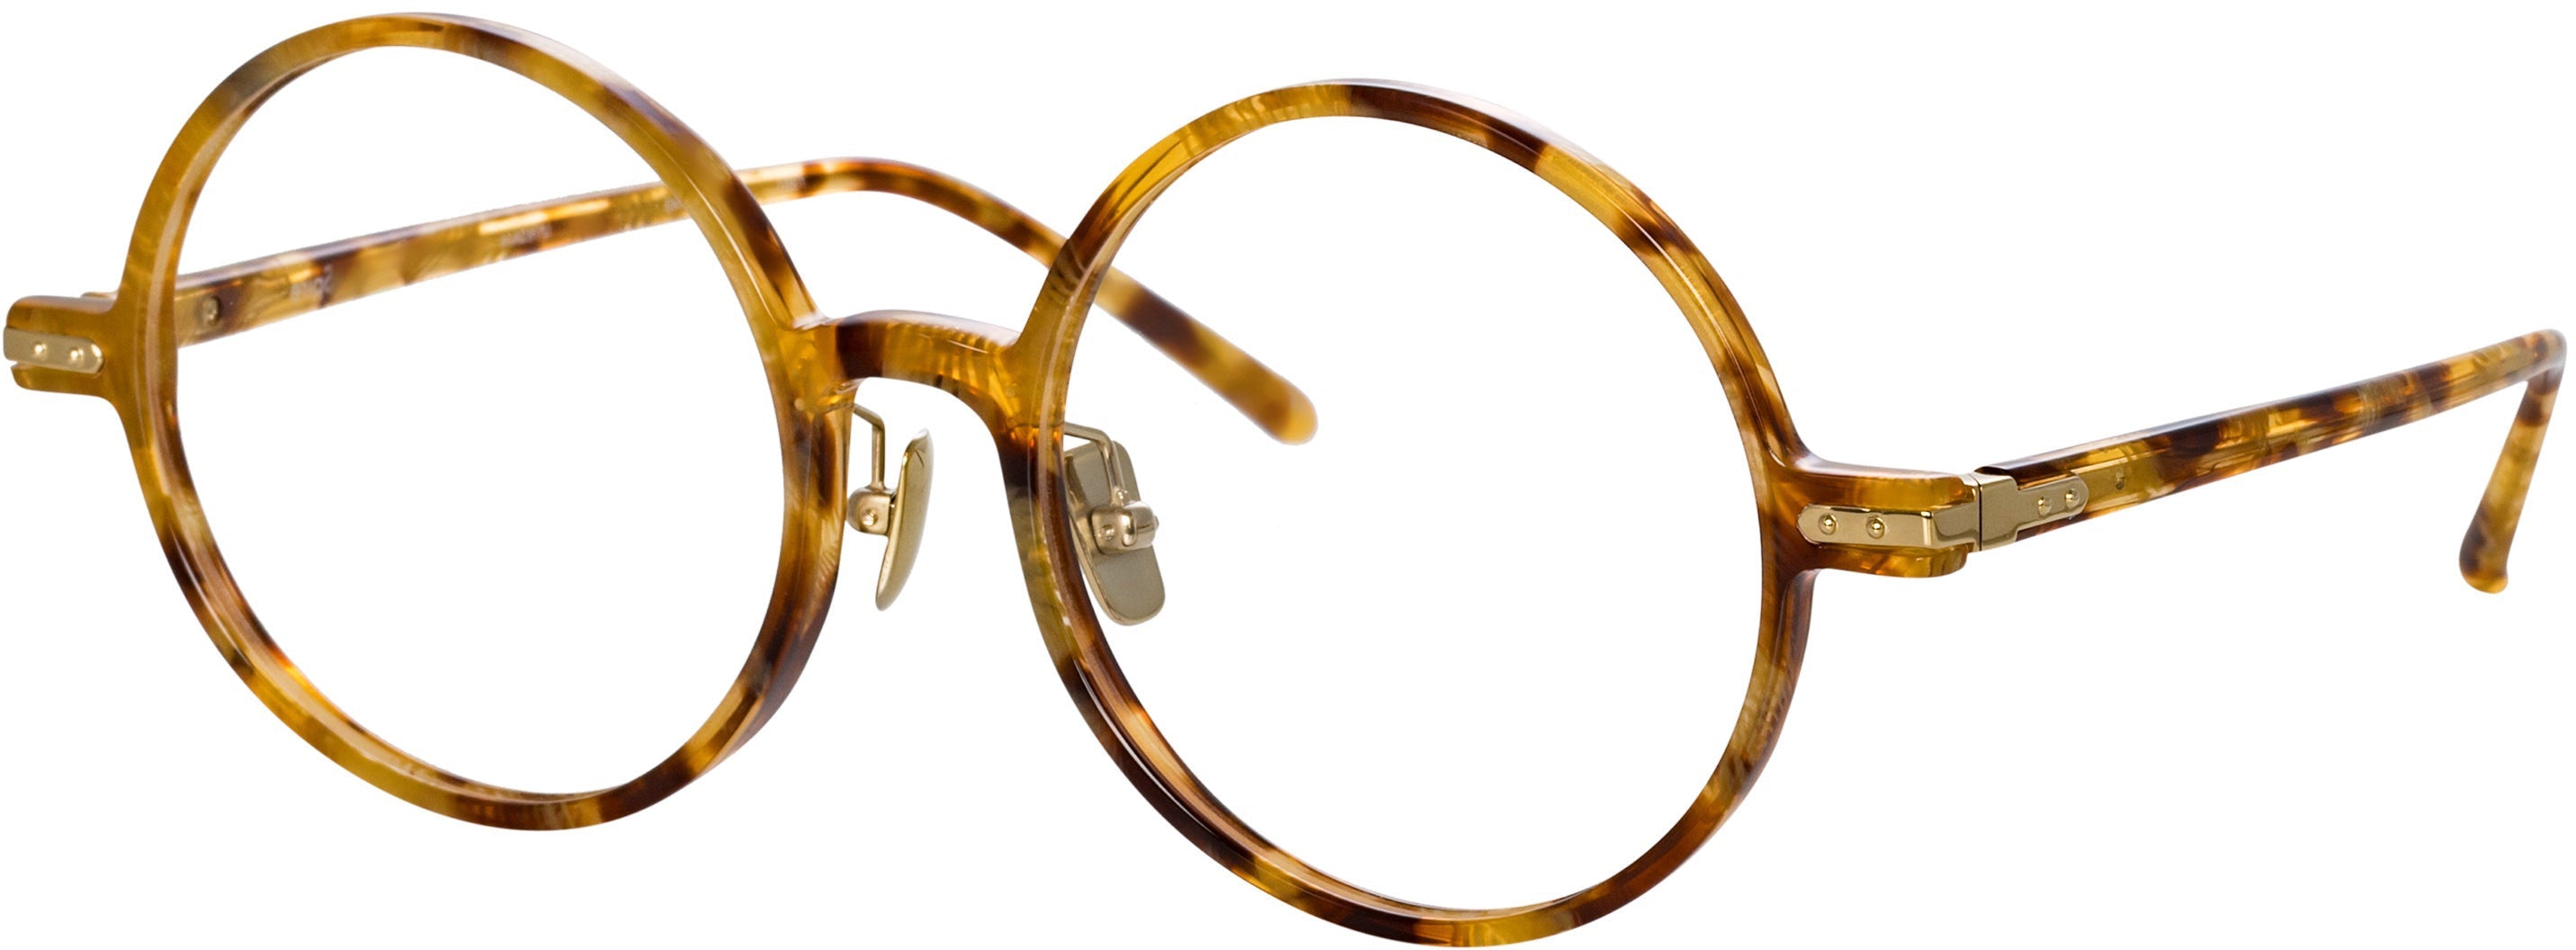 Color_LF62AC4OPT - Spire A Round Optical Frame in Tobacco Tortoiseshell